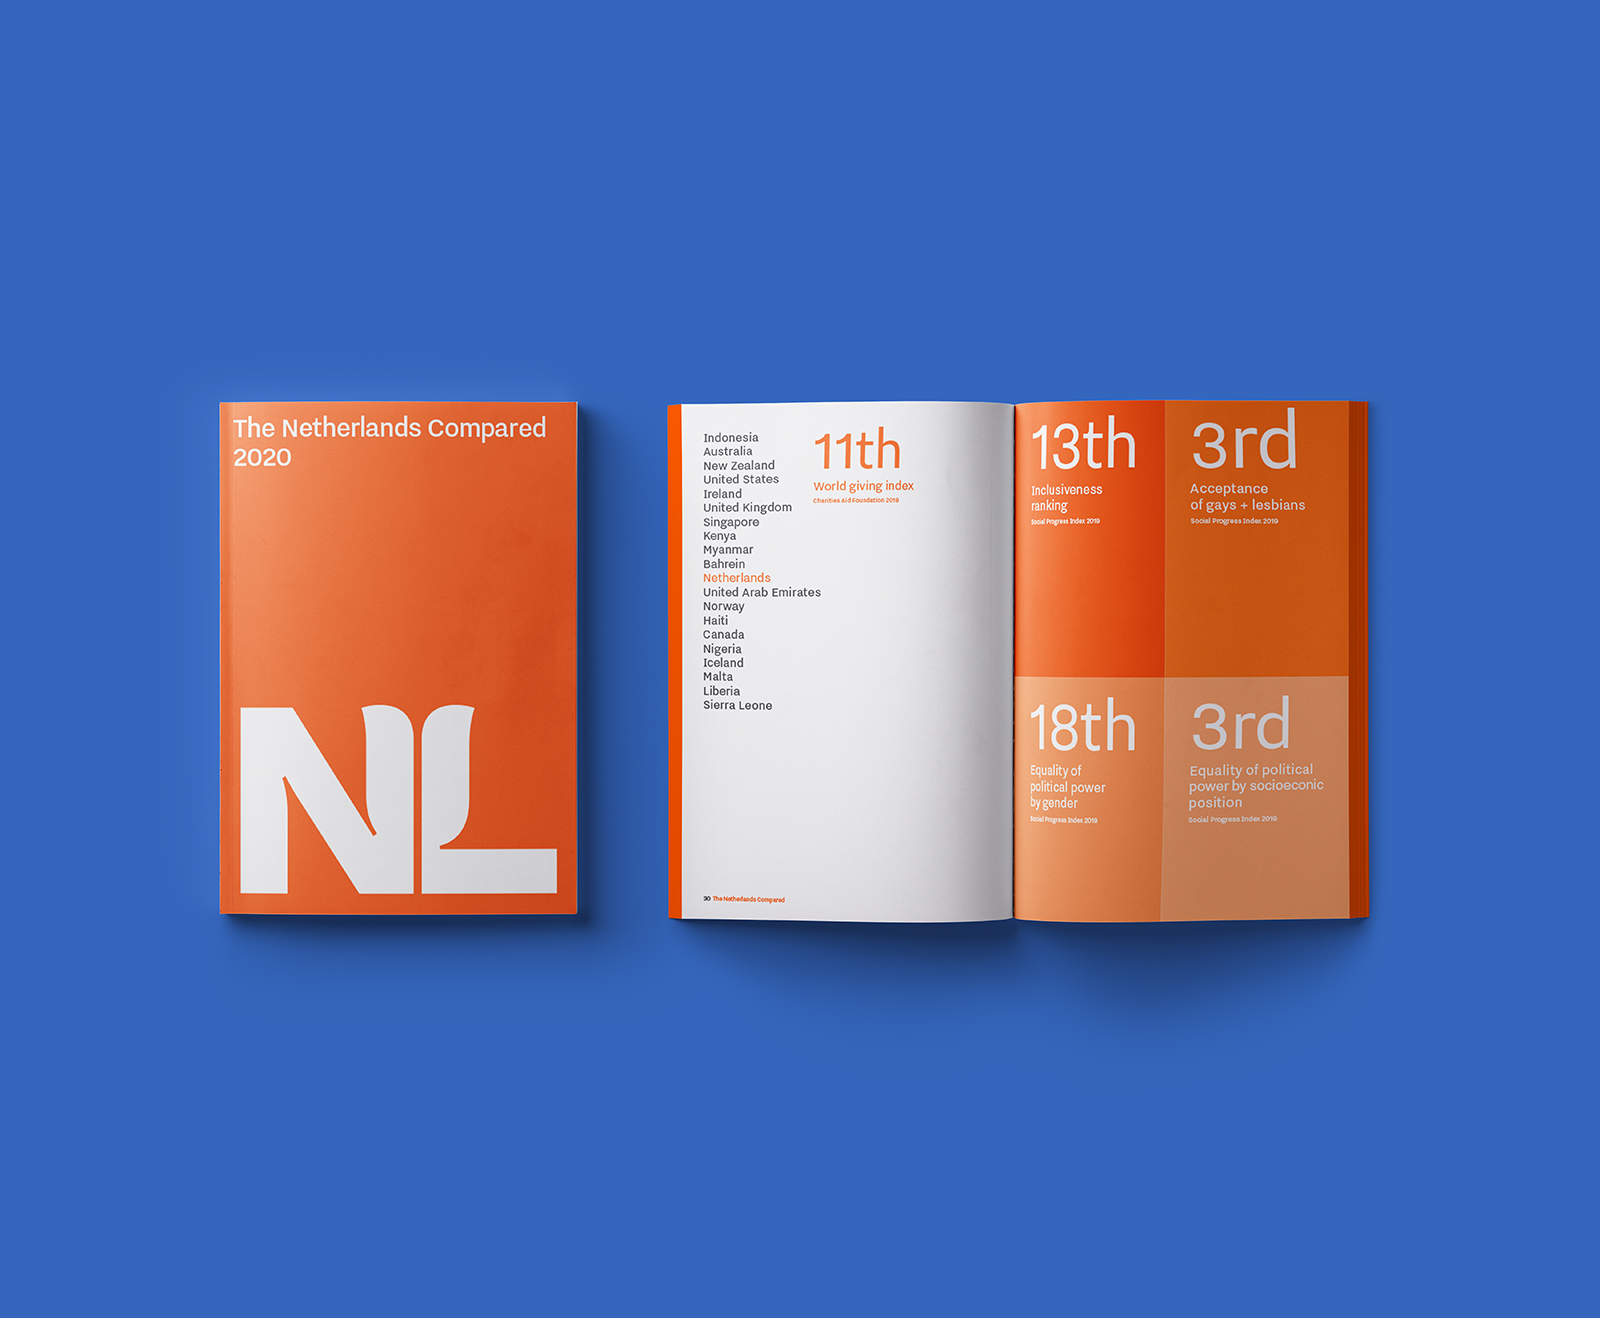 The Netherlands compared booklet